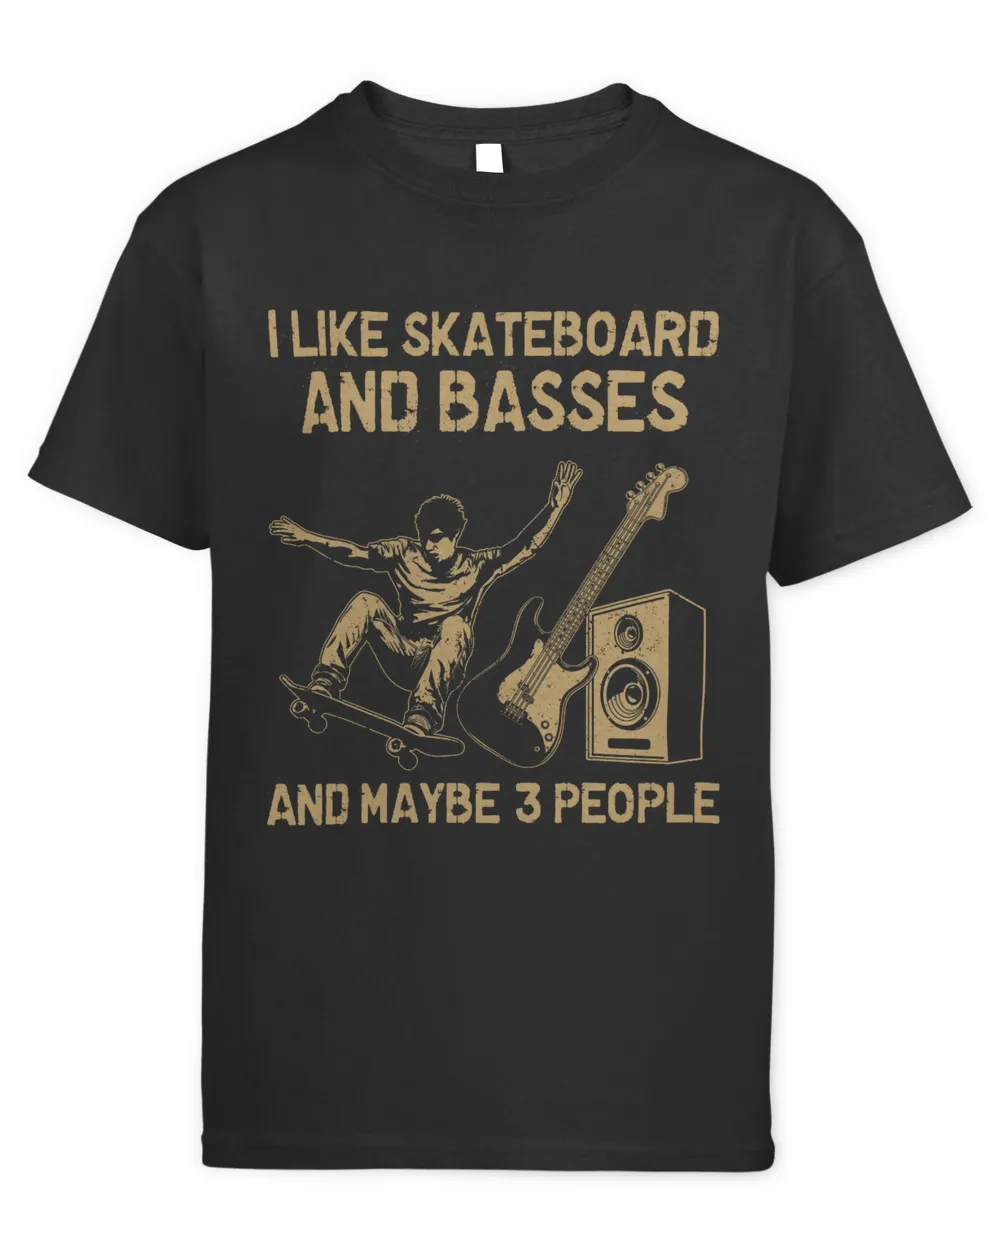 I like Skateboard and basses maybe 3 people-Recovered